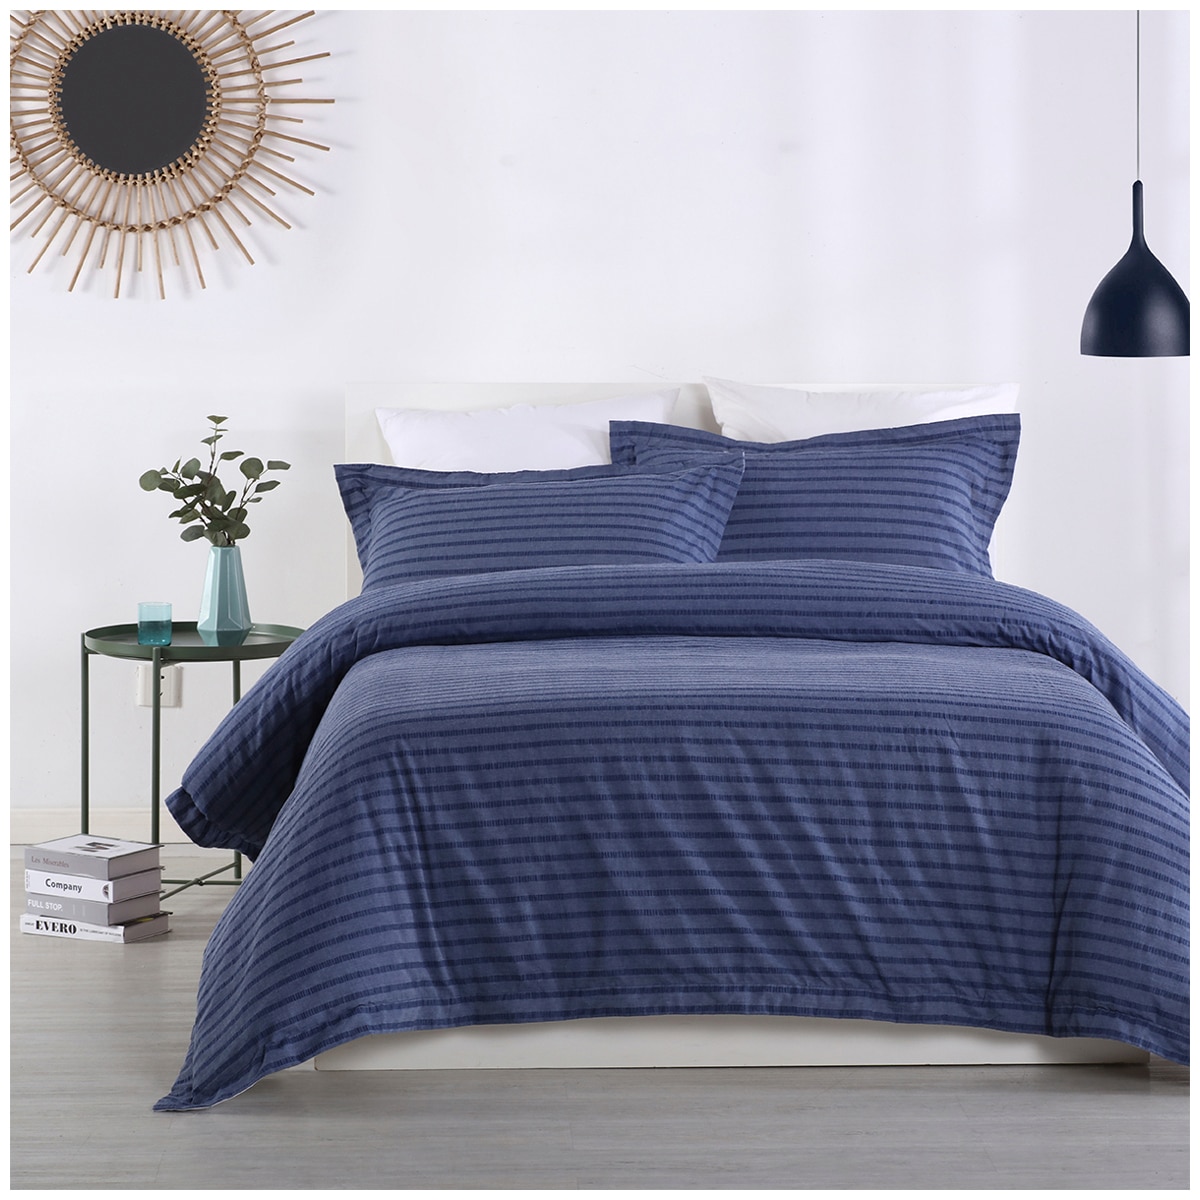 Onkaparinga 3 Piece Quilt Cover Set Queen - Byron